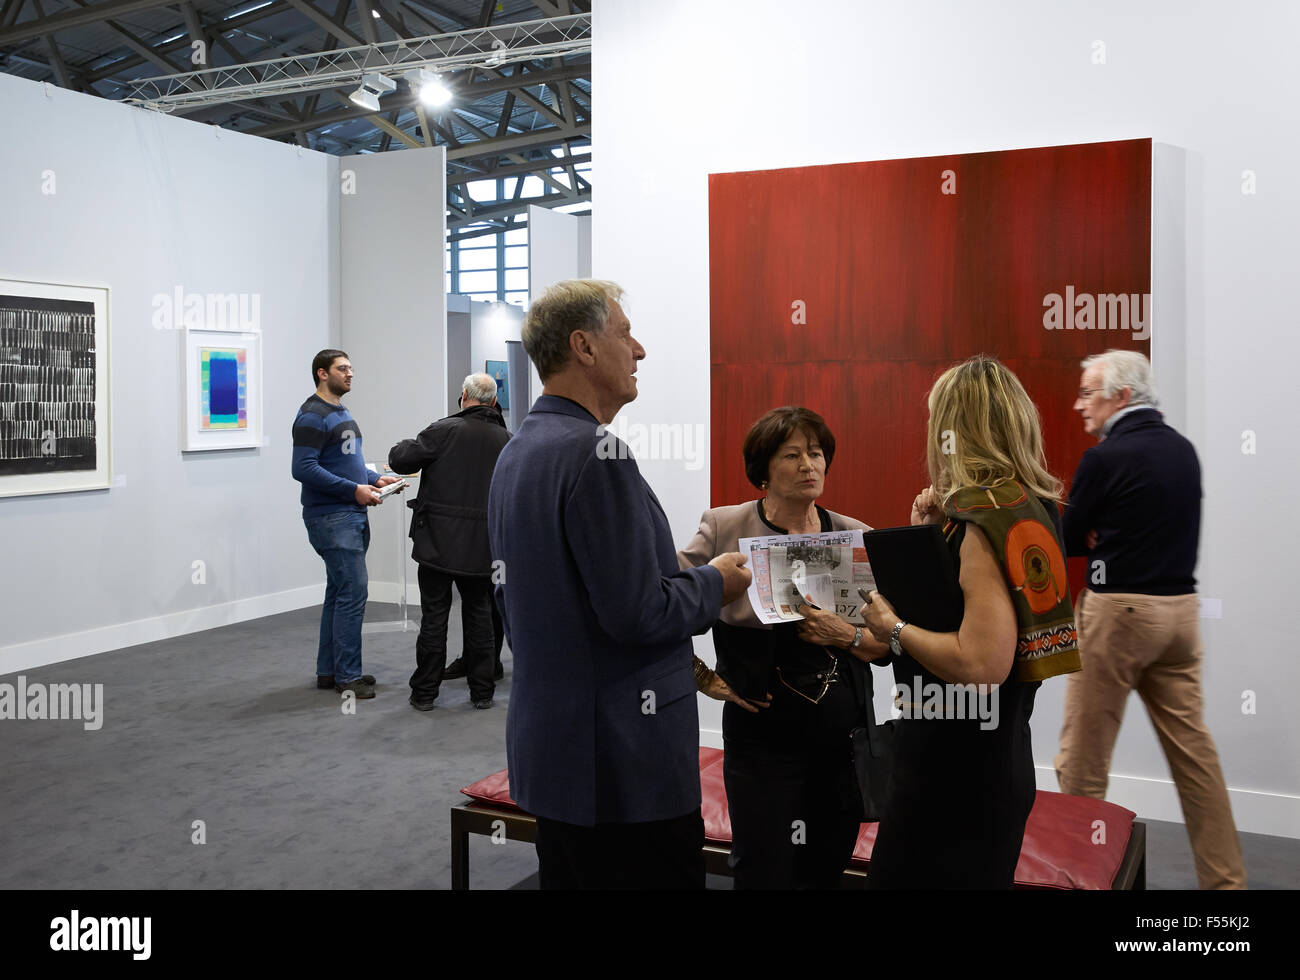 01.02.2015, Frankfurt am Main, Hesse, Germany - Visitors to the Art Fair Frankfurt 15 at the booth of the gallery Kronsbein from Munich. 00R150201D059CAROEX.JPG - NOT for SALE in G E R M A N Y, A U S T R I A, S W I T Z E R L A N D [MODEL RELEASE: NO, PROPERTY RELEASE: NO (c) caro photo agency / Ruffer, http://www.caro-images.pl, info@carofoto.pl - In case of using the picture for non-journalistic purposes, please contact the agency - the picture is subject to royalty!] Stock Photo